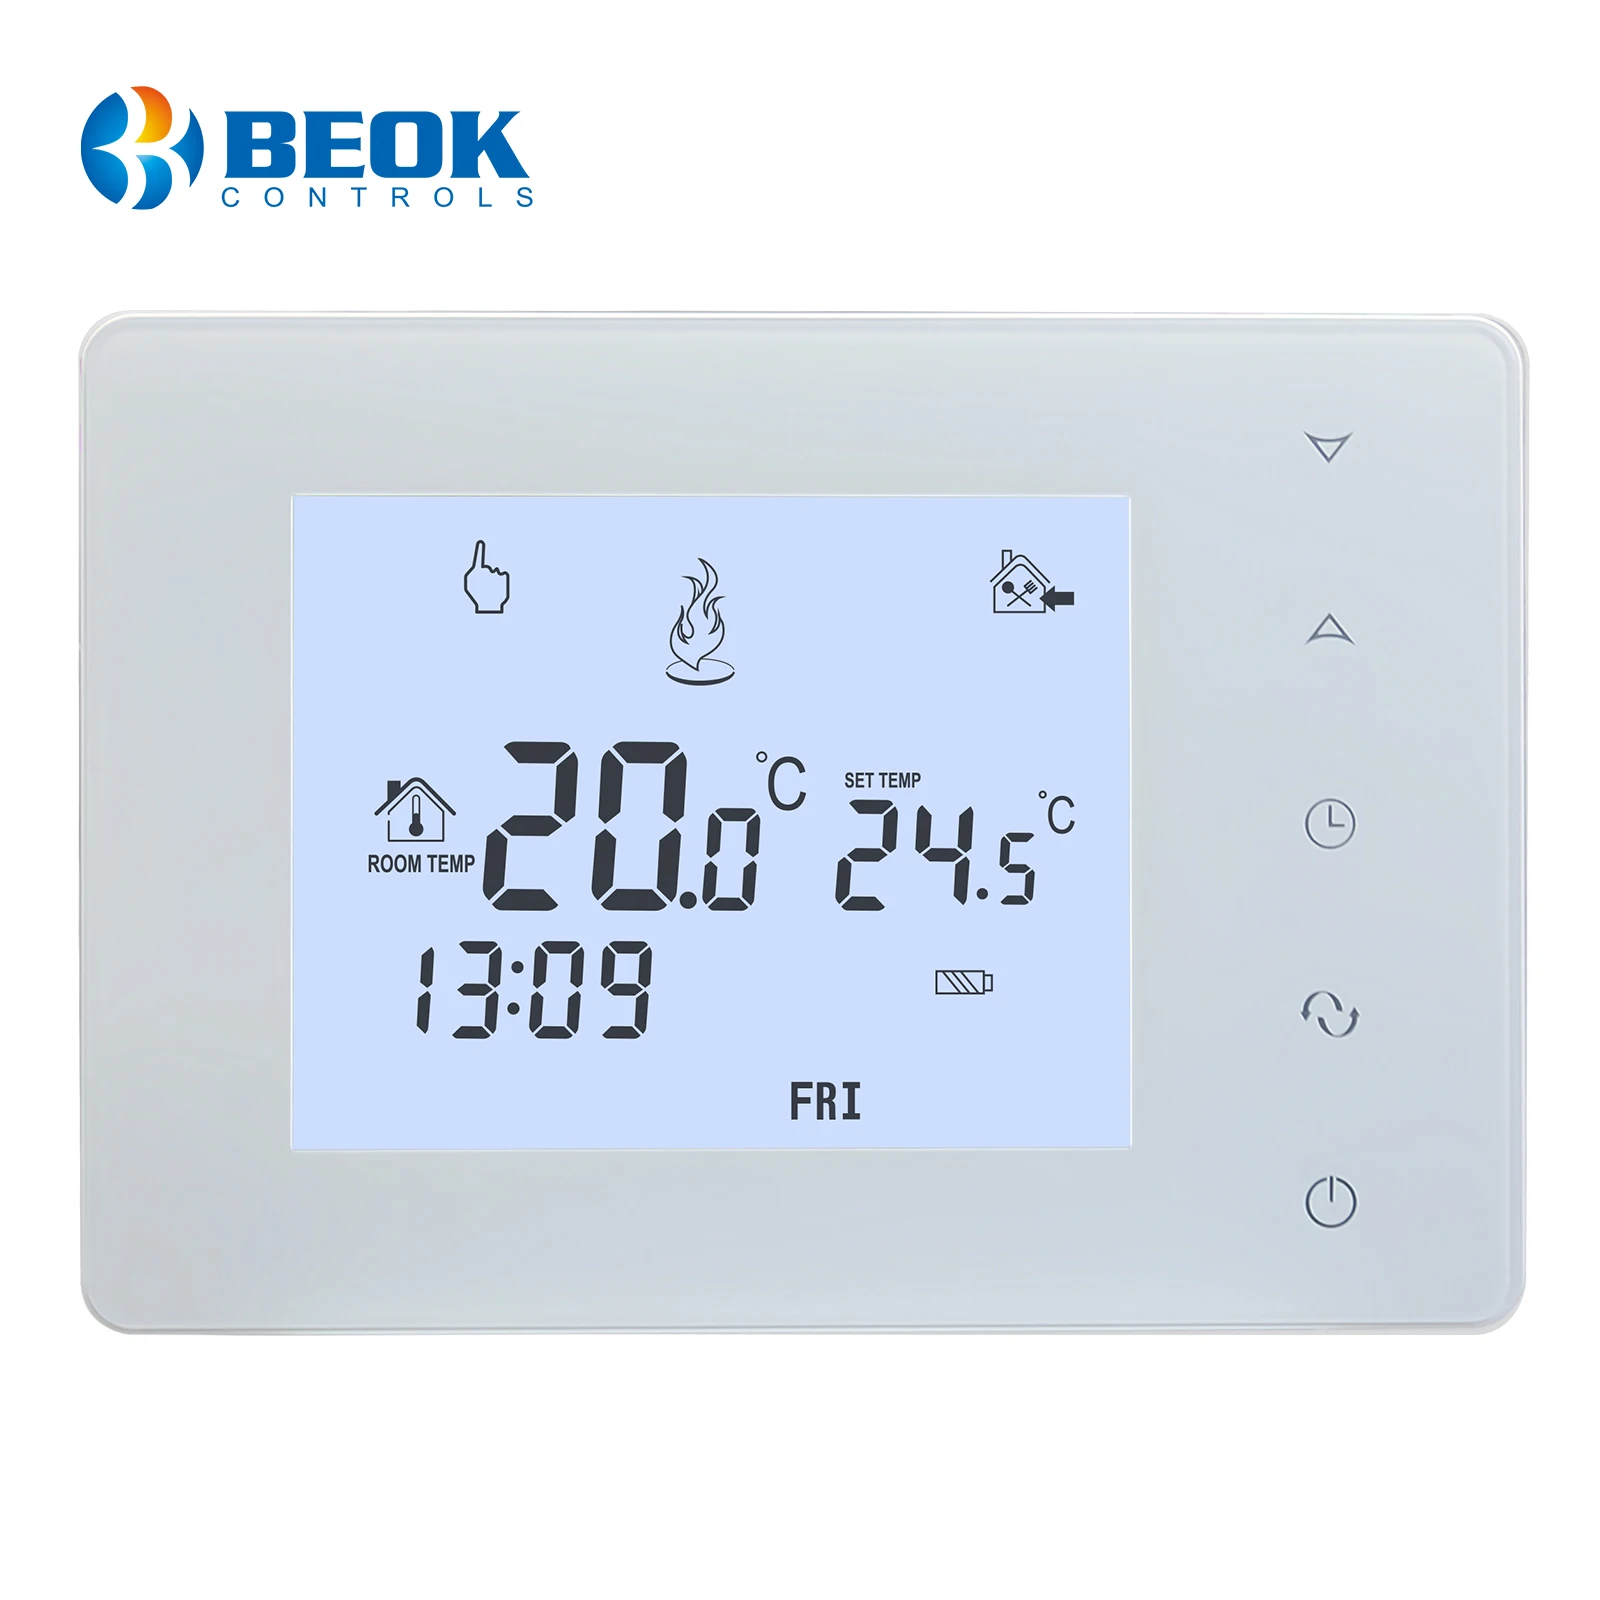 

Beok Smart Wired Thermostat Gas Boiler Heating Room Programmable Thermoregulator Temperature Controller Battery Powered